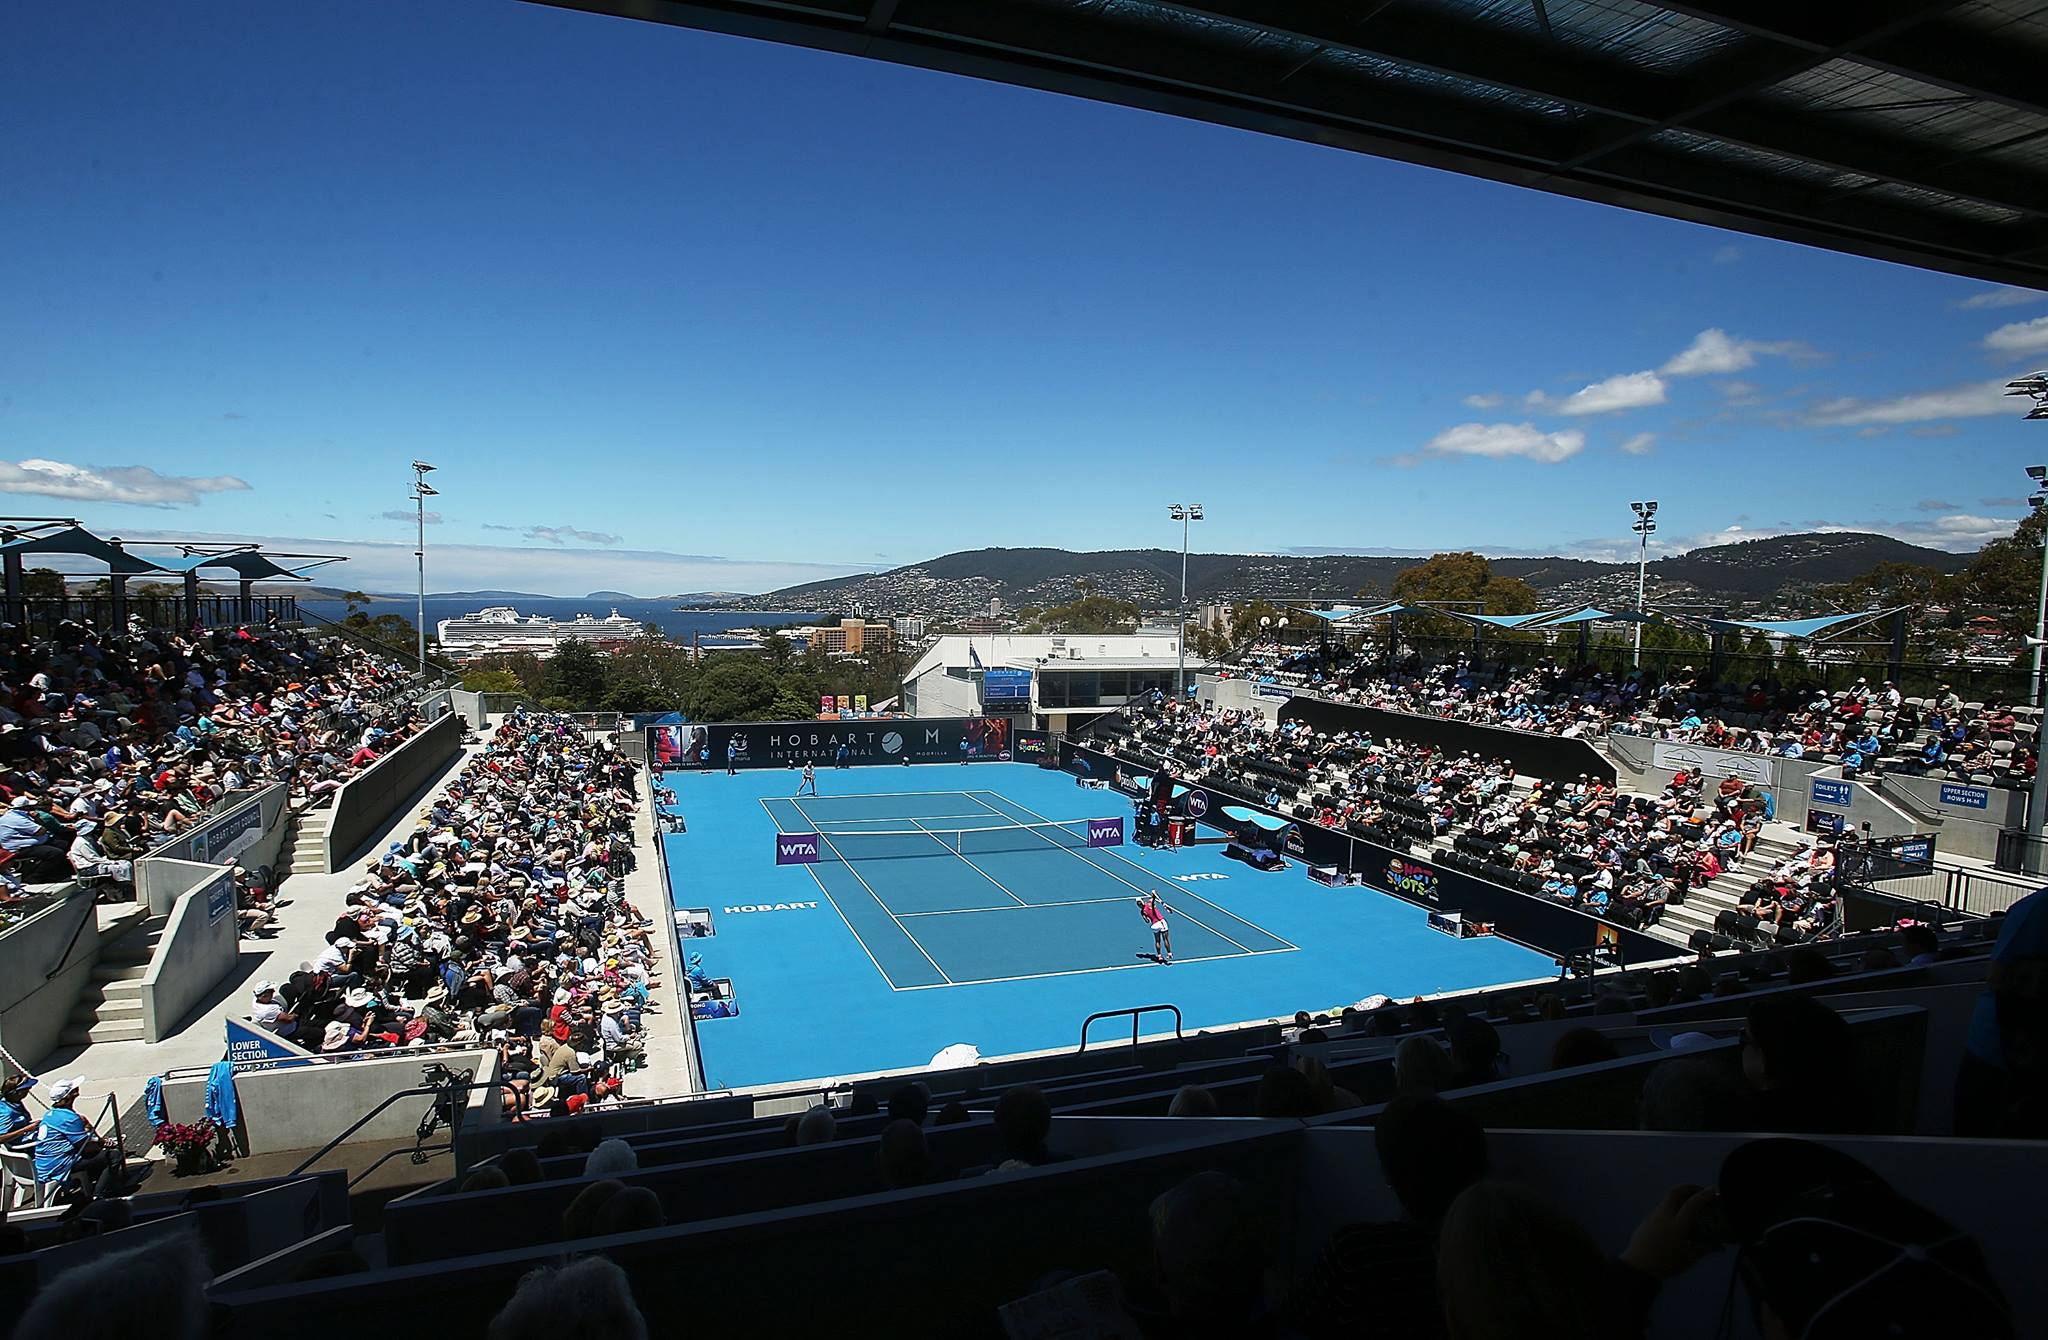 Davis and Cocciaretto to play for the title in Hobart